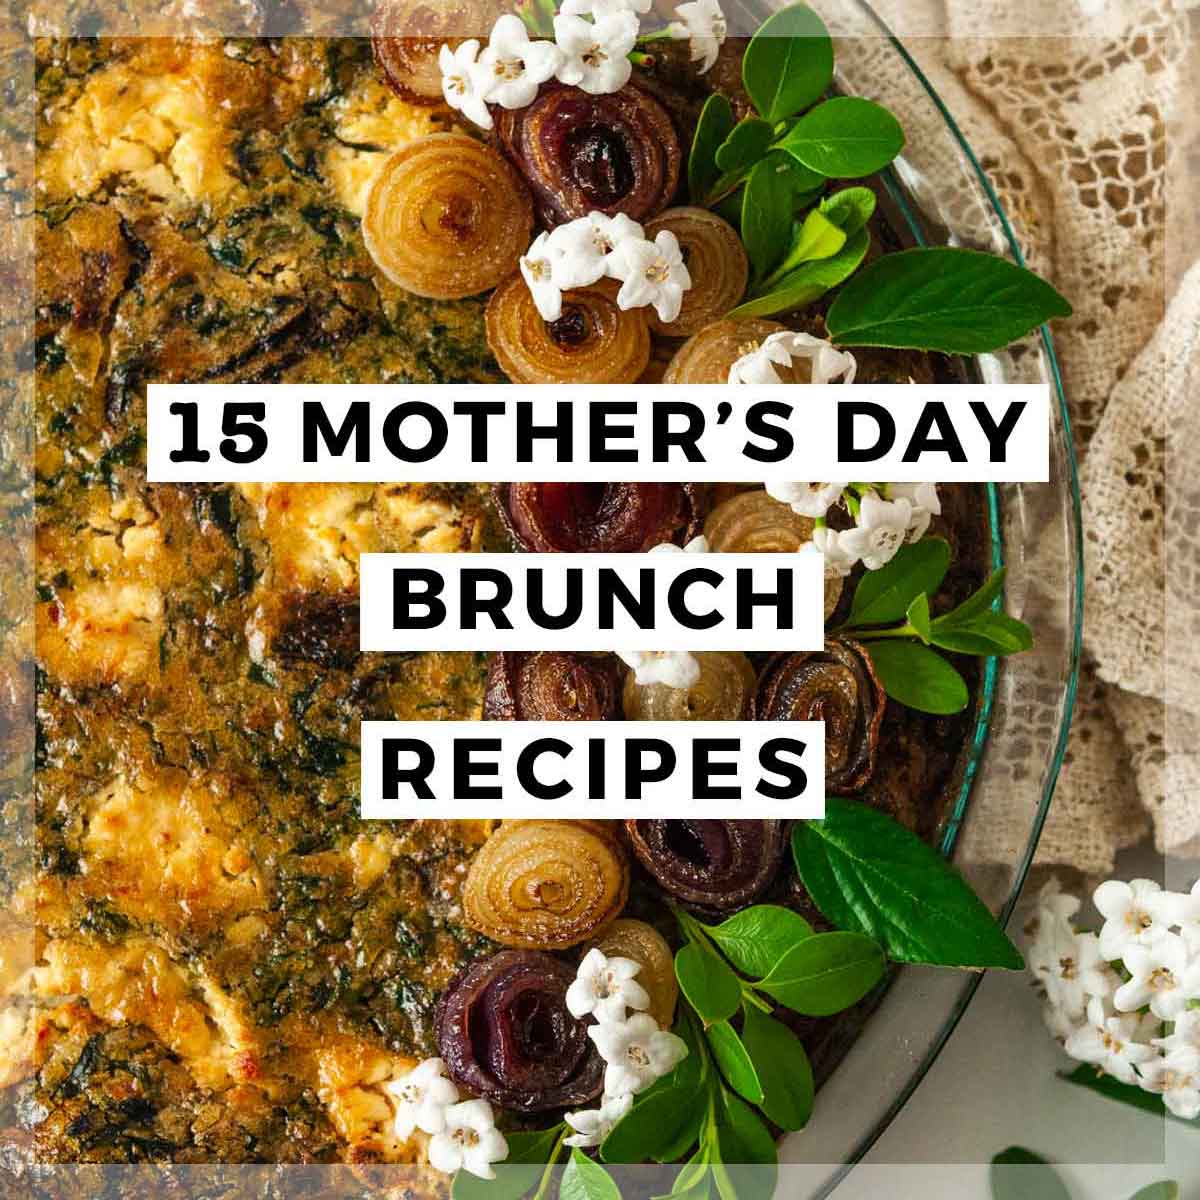 A flower, garnished quiche with a title that says "15 Mother's Day Brunch Recipes."